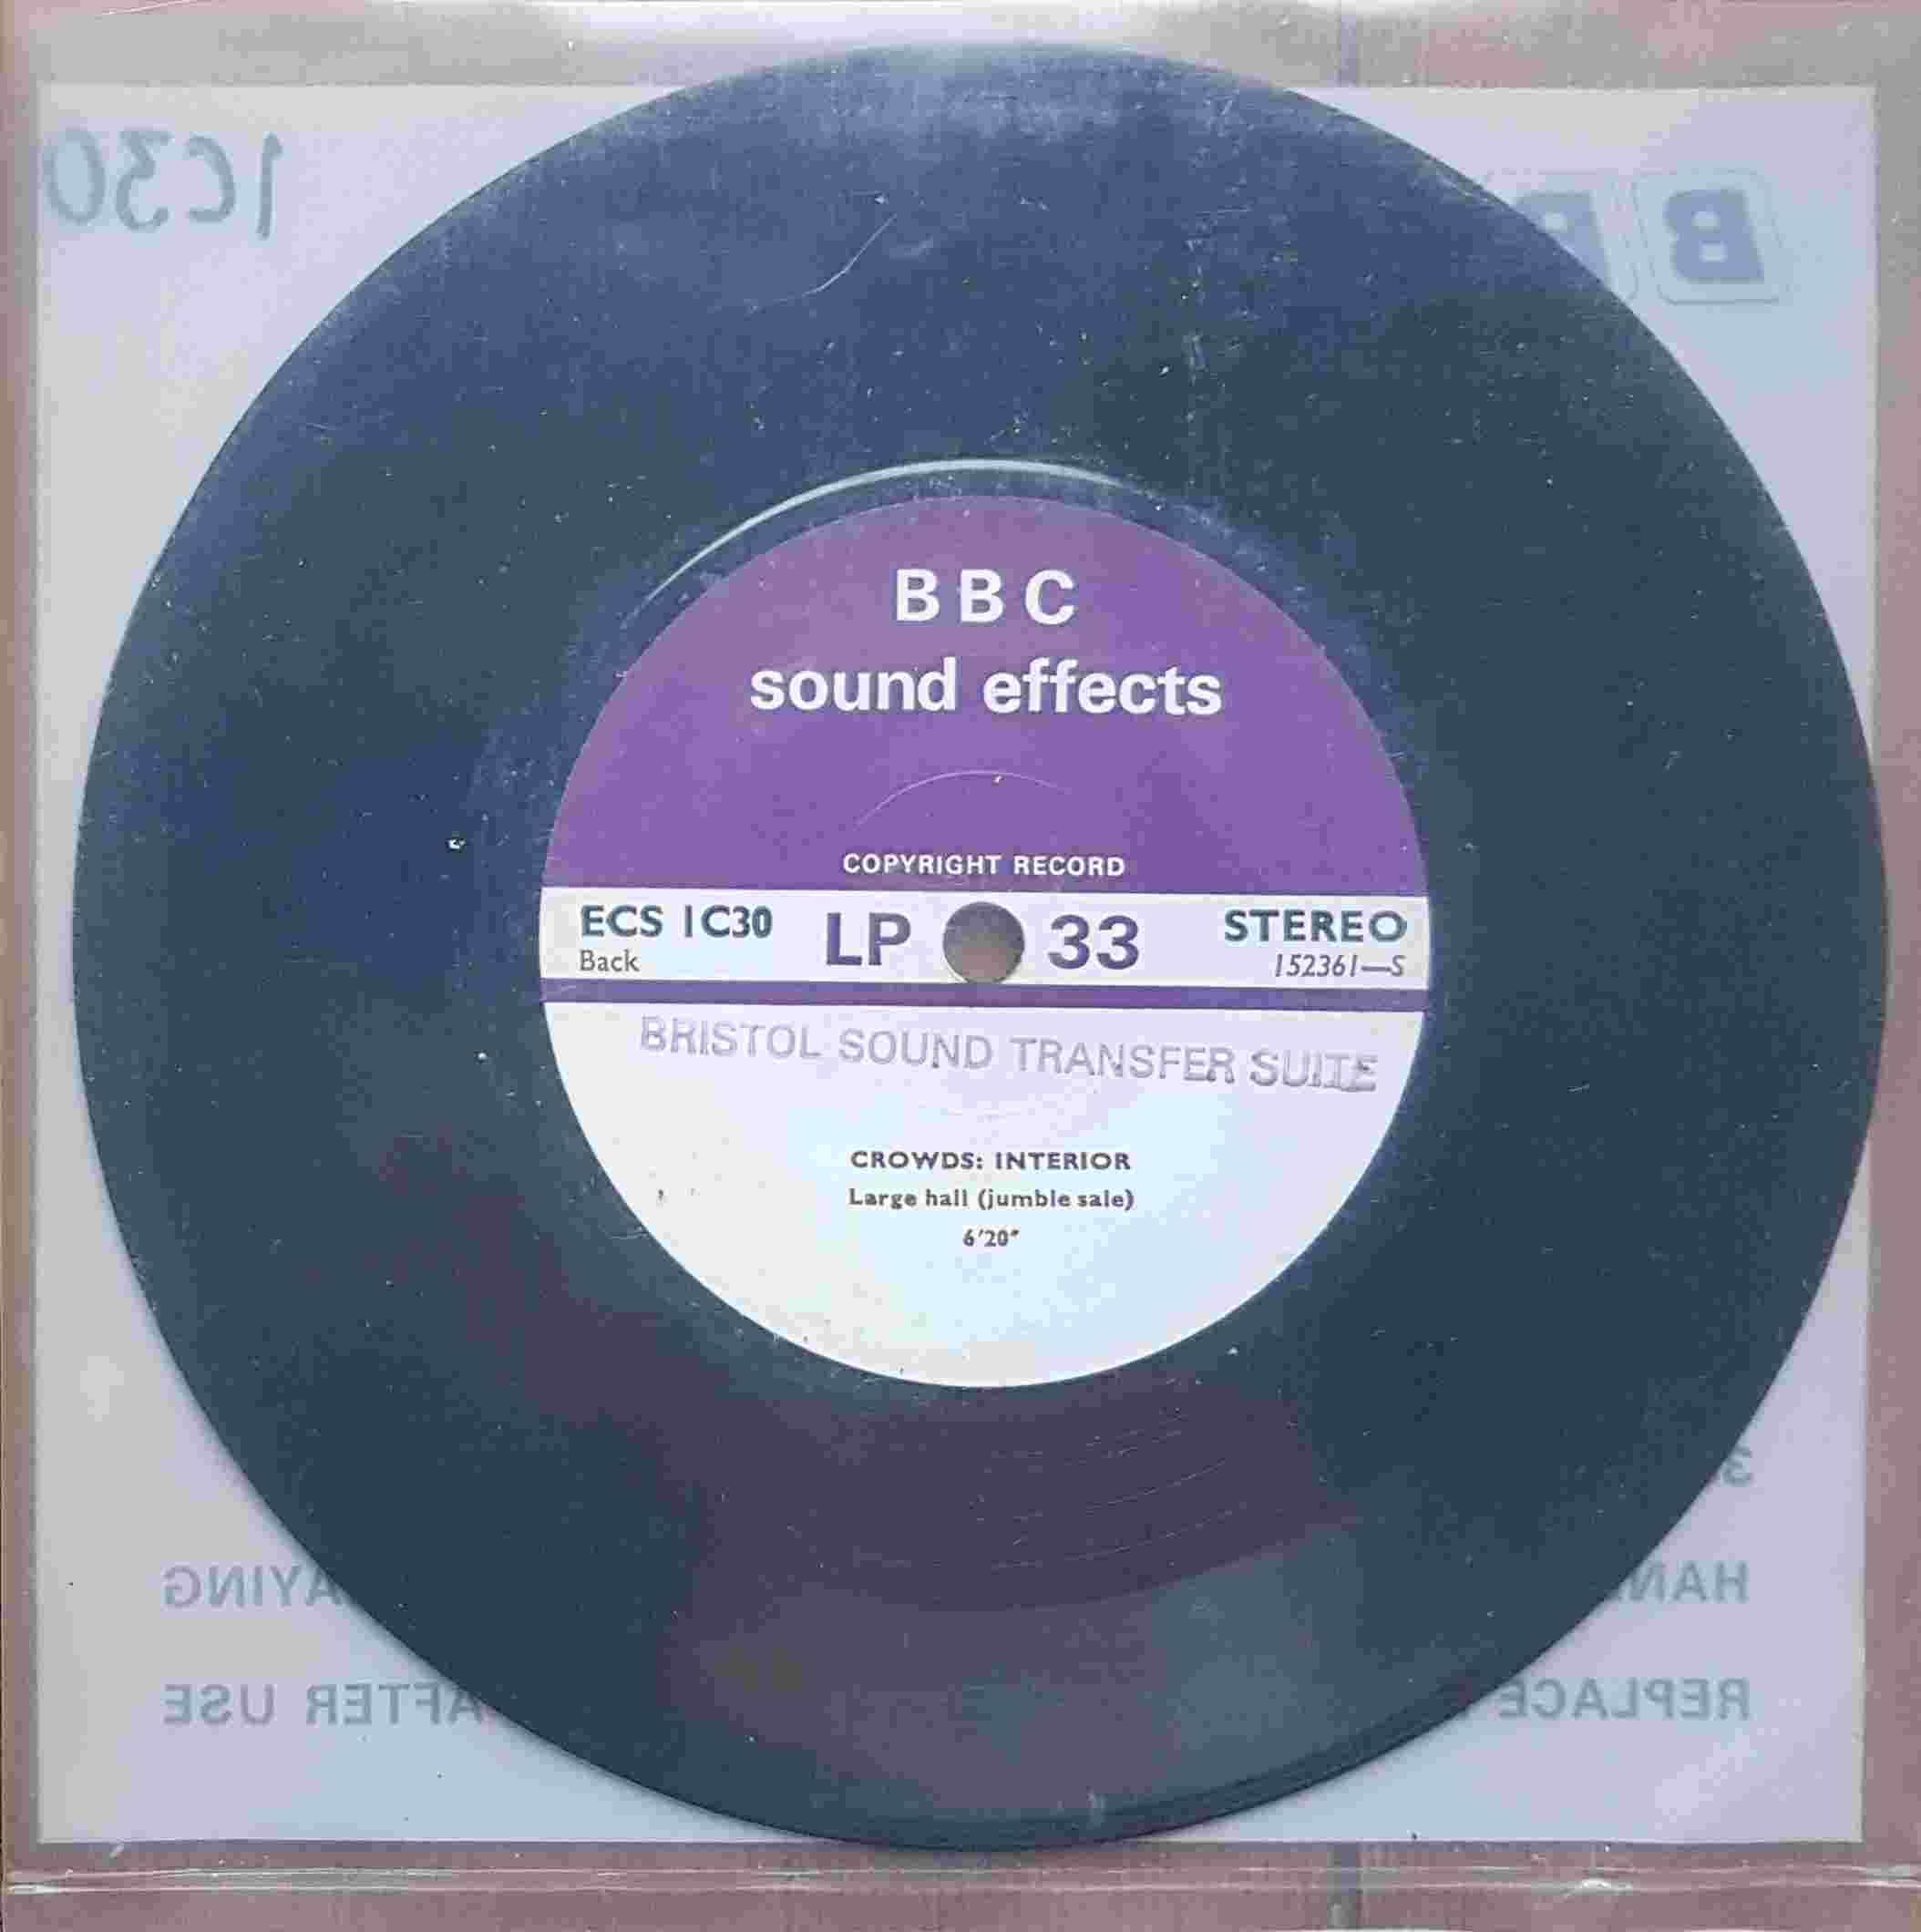 Picture of ECS 1C30 Crowds: Interior by artist Not registered from the BBC records and Tapes library